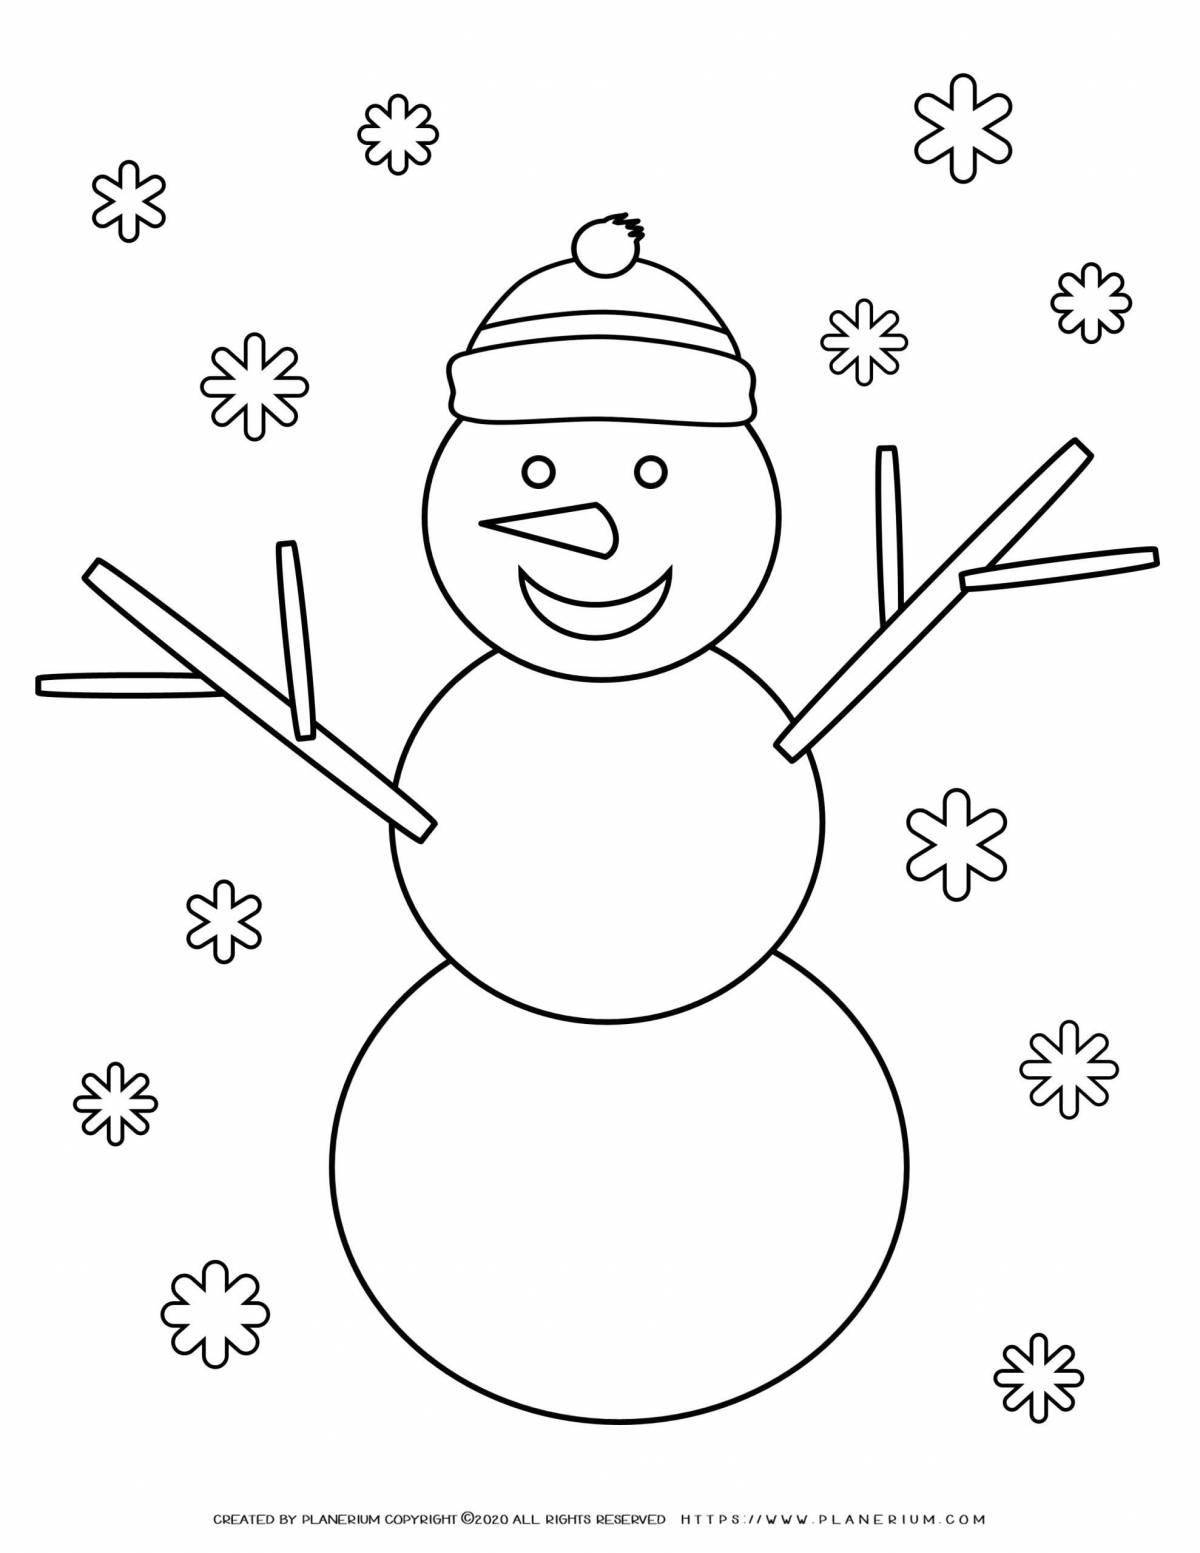 Colorful snowman coloring book for kids 5 6